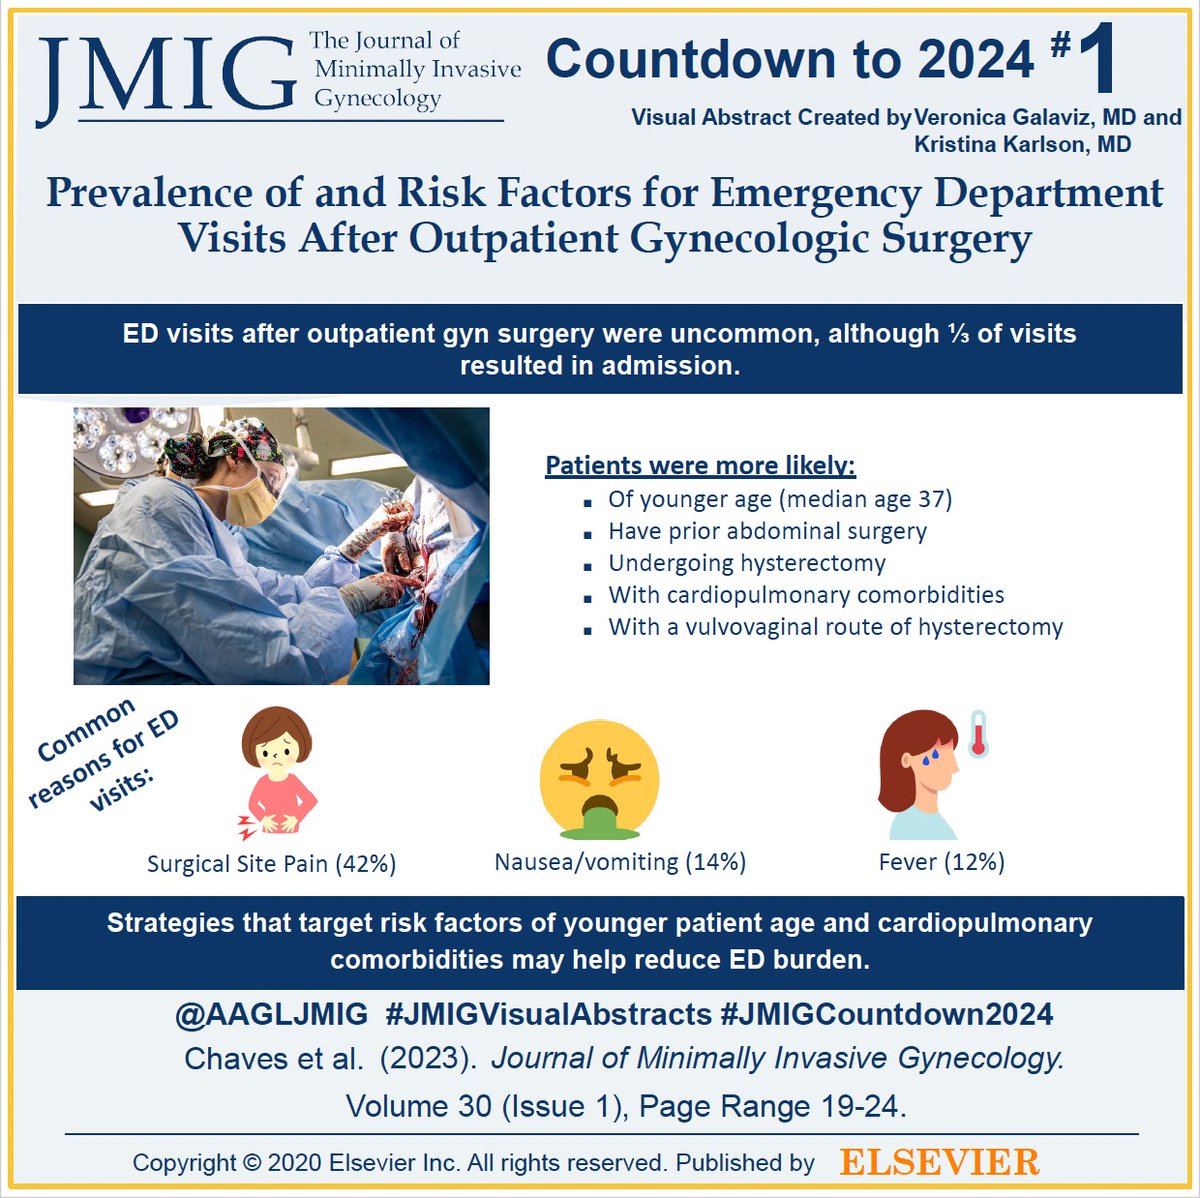 Countdown to 2024!🕐We have finally arrived to the #1 most downloaded #JMIG article of 2023: Prevalence of and Risk Factors for Emergency Department Visits After Outpatient Gynecologic Surgery. doi.org/10.1016/j.jmig… #JMIGVisualAbstract #JMIGCoundown2024 #gynecology #EDvisits